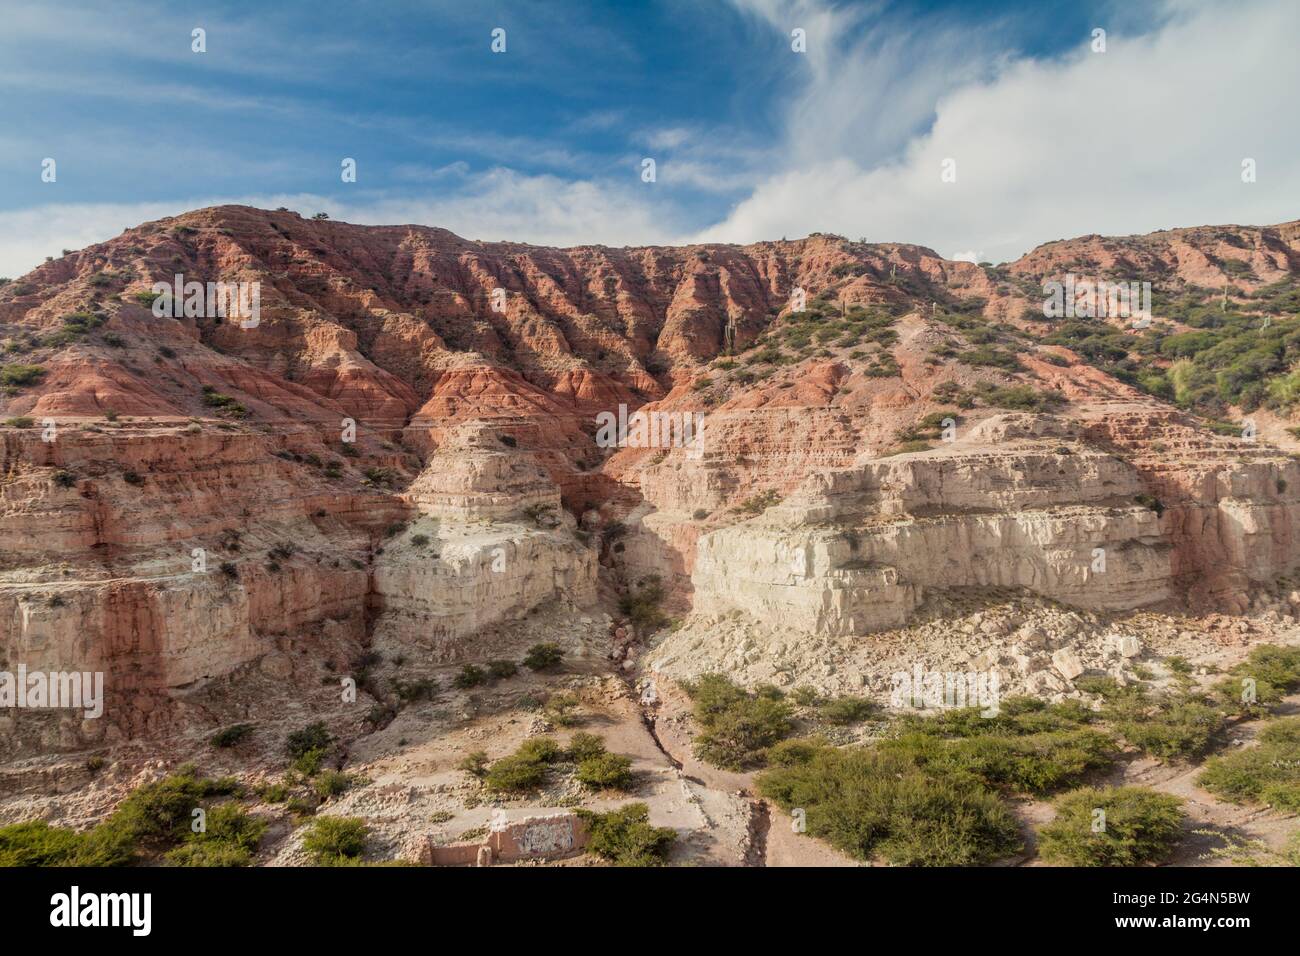 Colorate rocce stratificate vicino a Humahuaca, Argentina Foto Stock